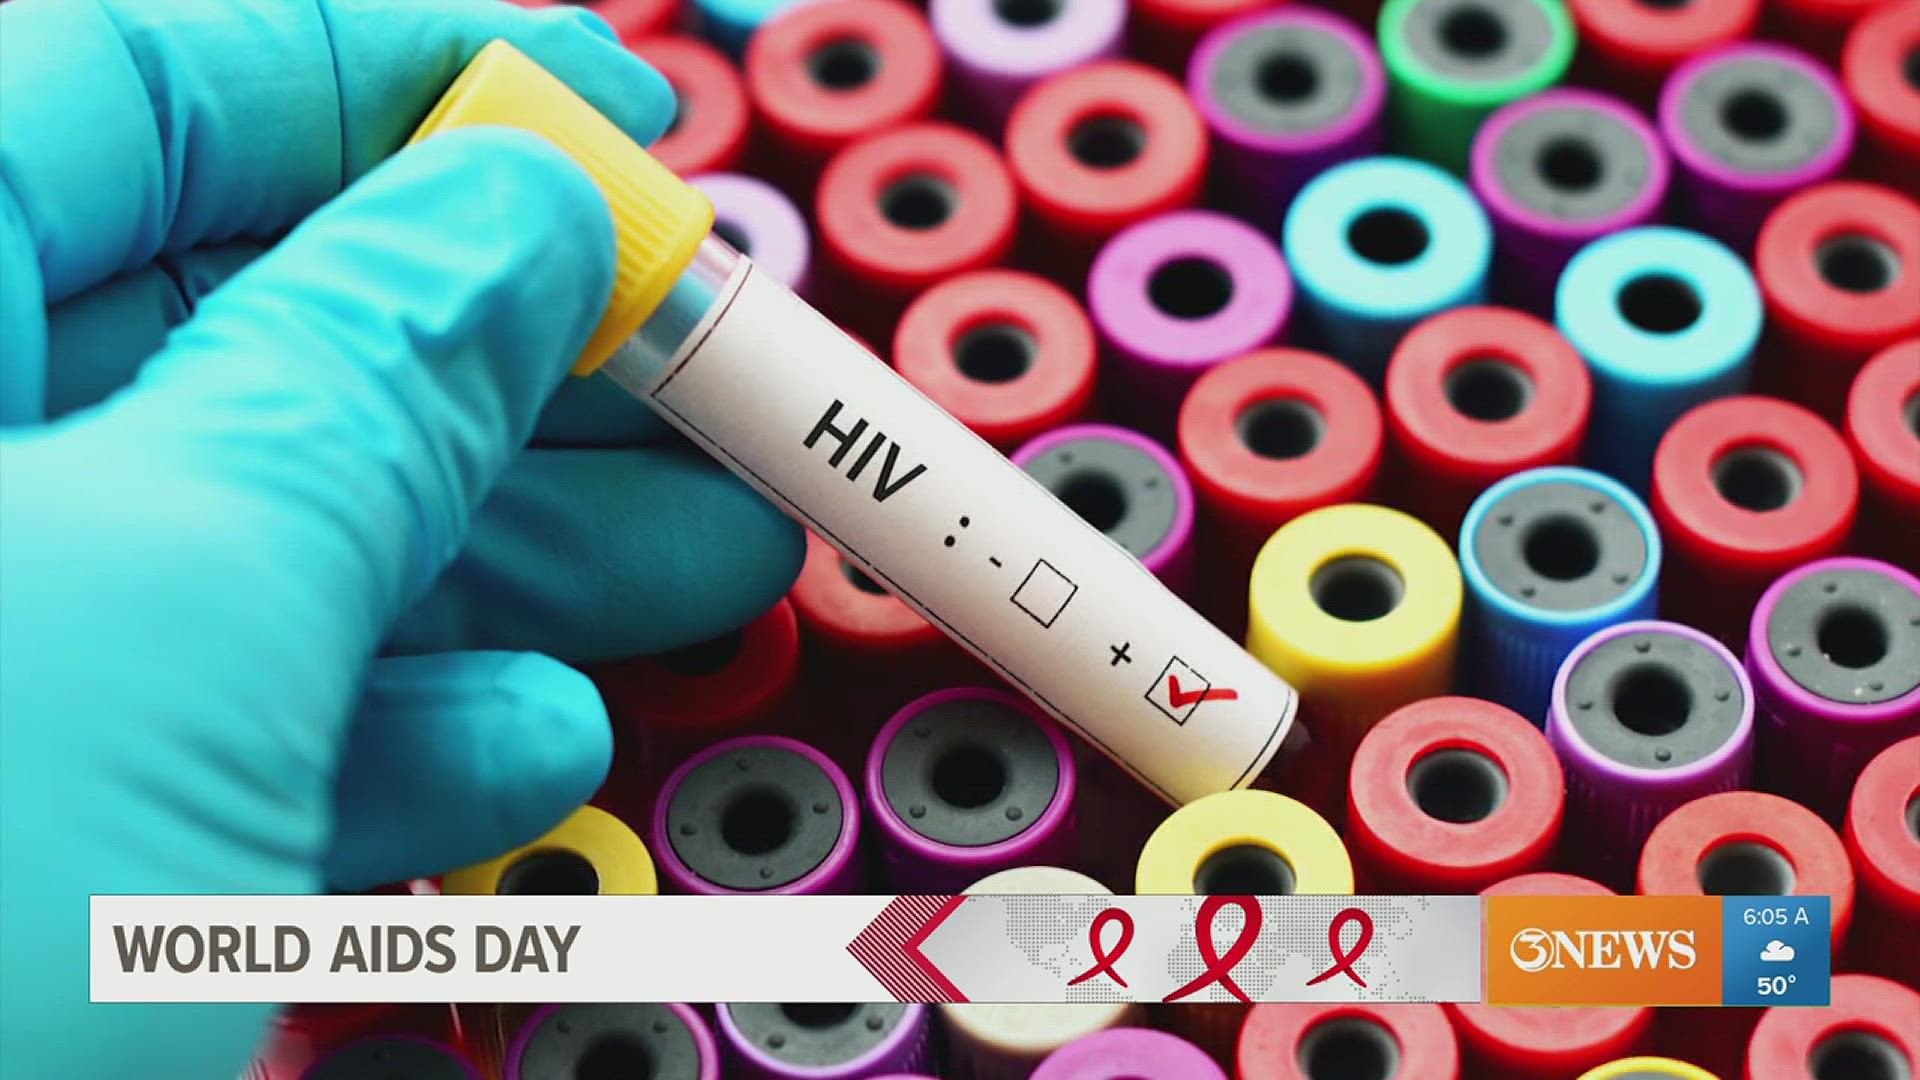 World AIDS Day is commemorated on December 1st and raises awareness on stopping the spread of HIV